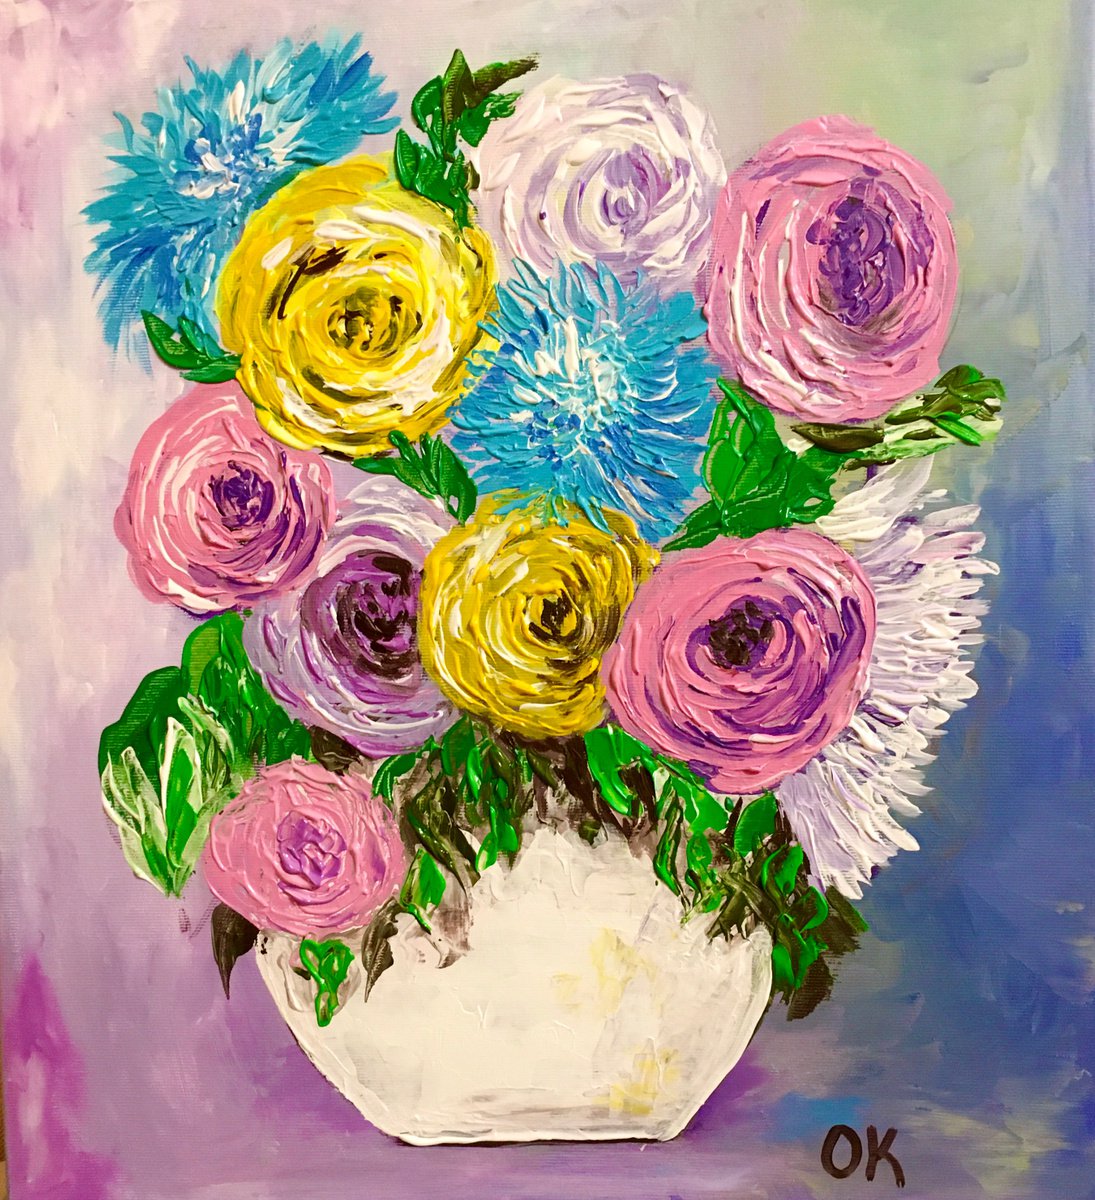 BOUQUET OF ROSES #6 palette knife Still life flowers Dutch style office home decor gift by Olga Koval